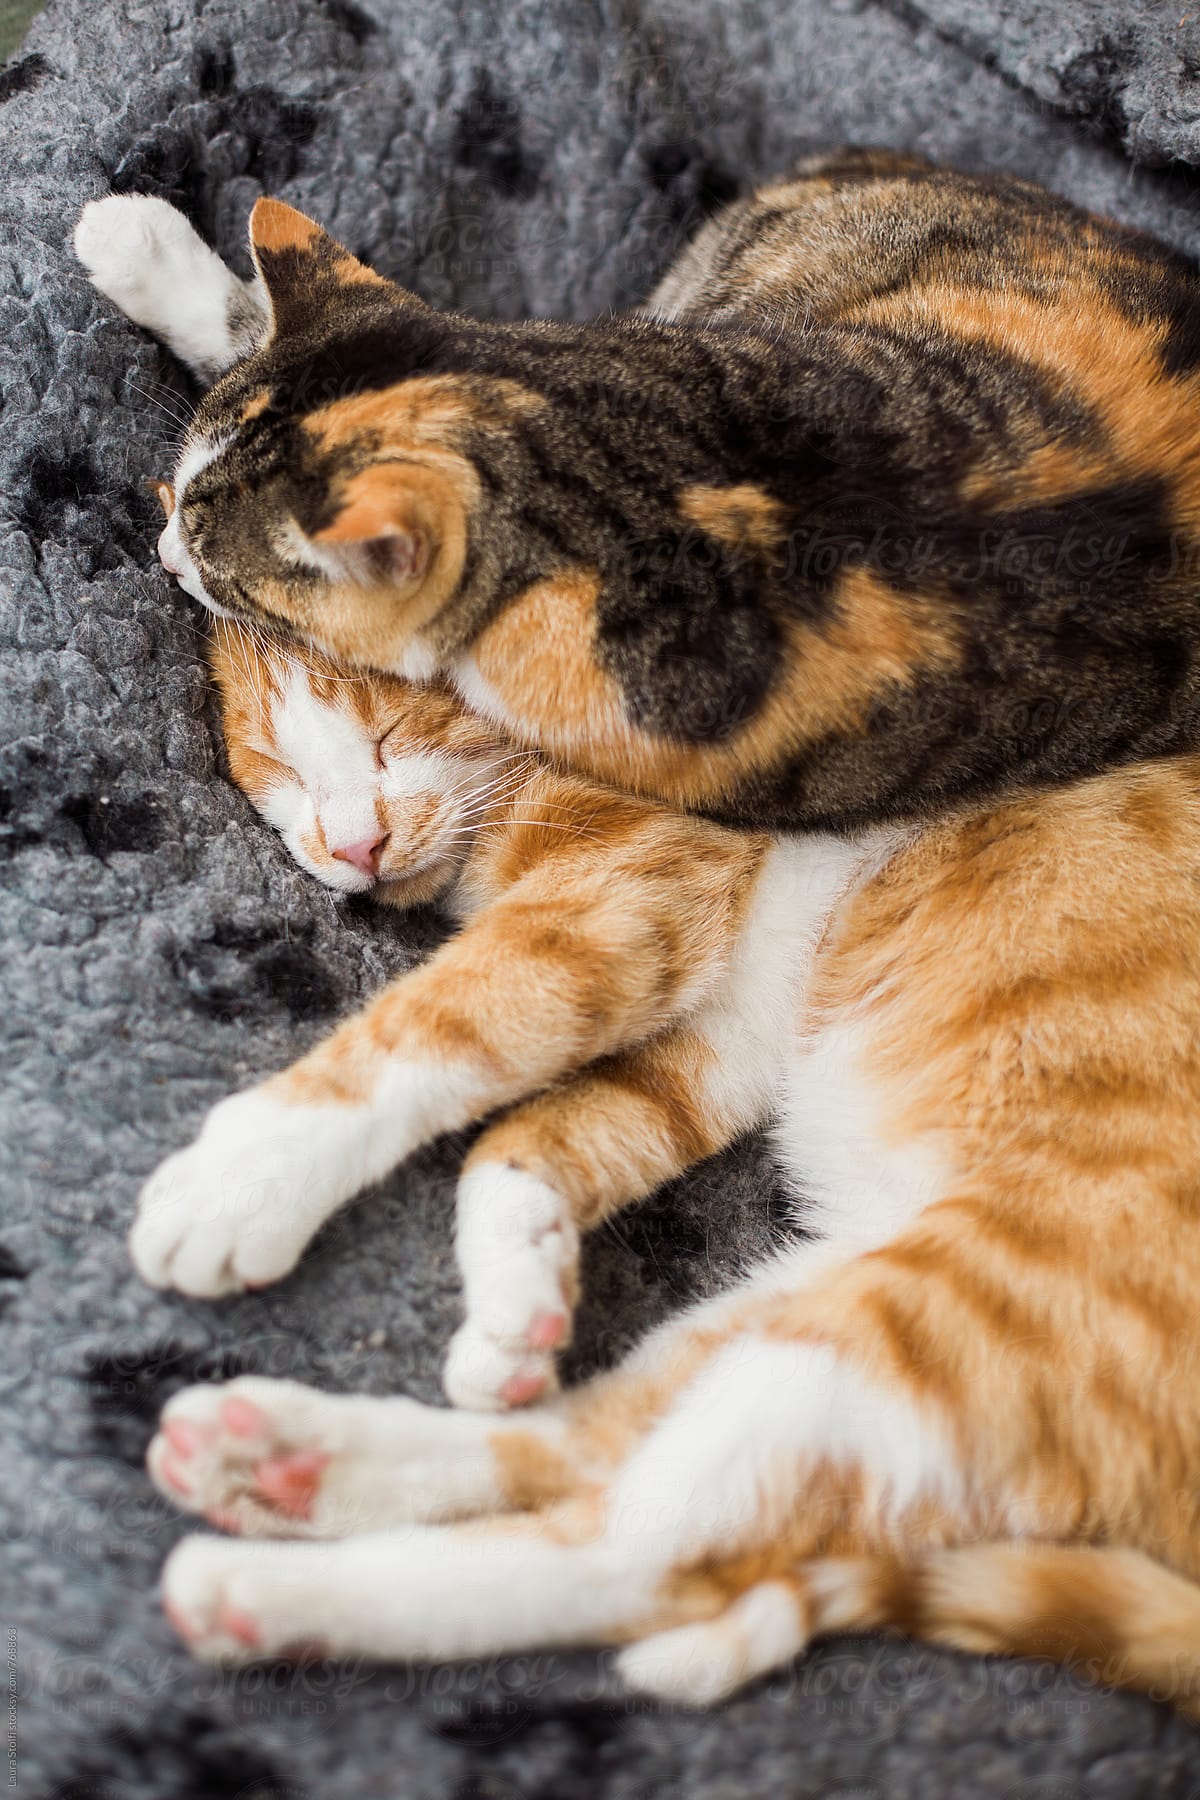 Adorable cats hugging while sleeping together in woolen kennel